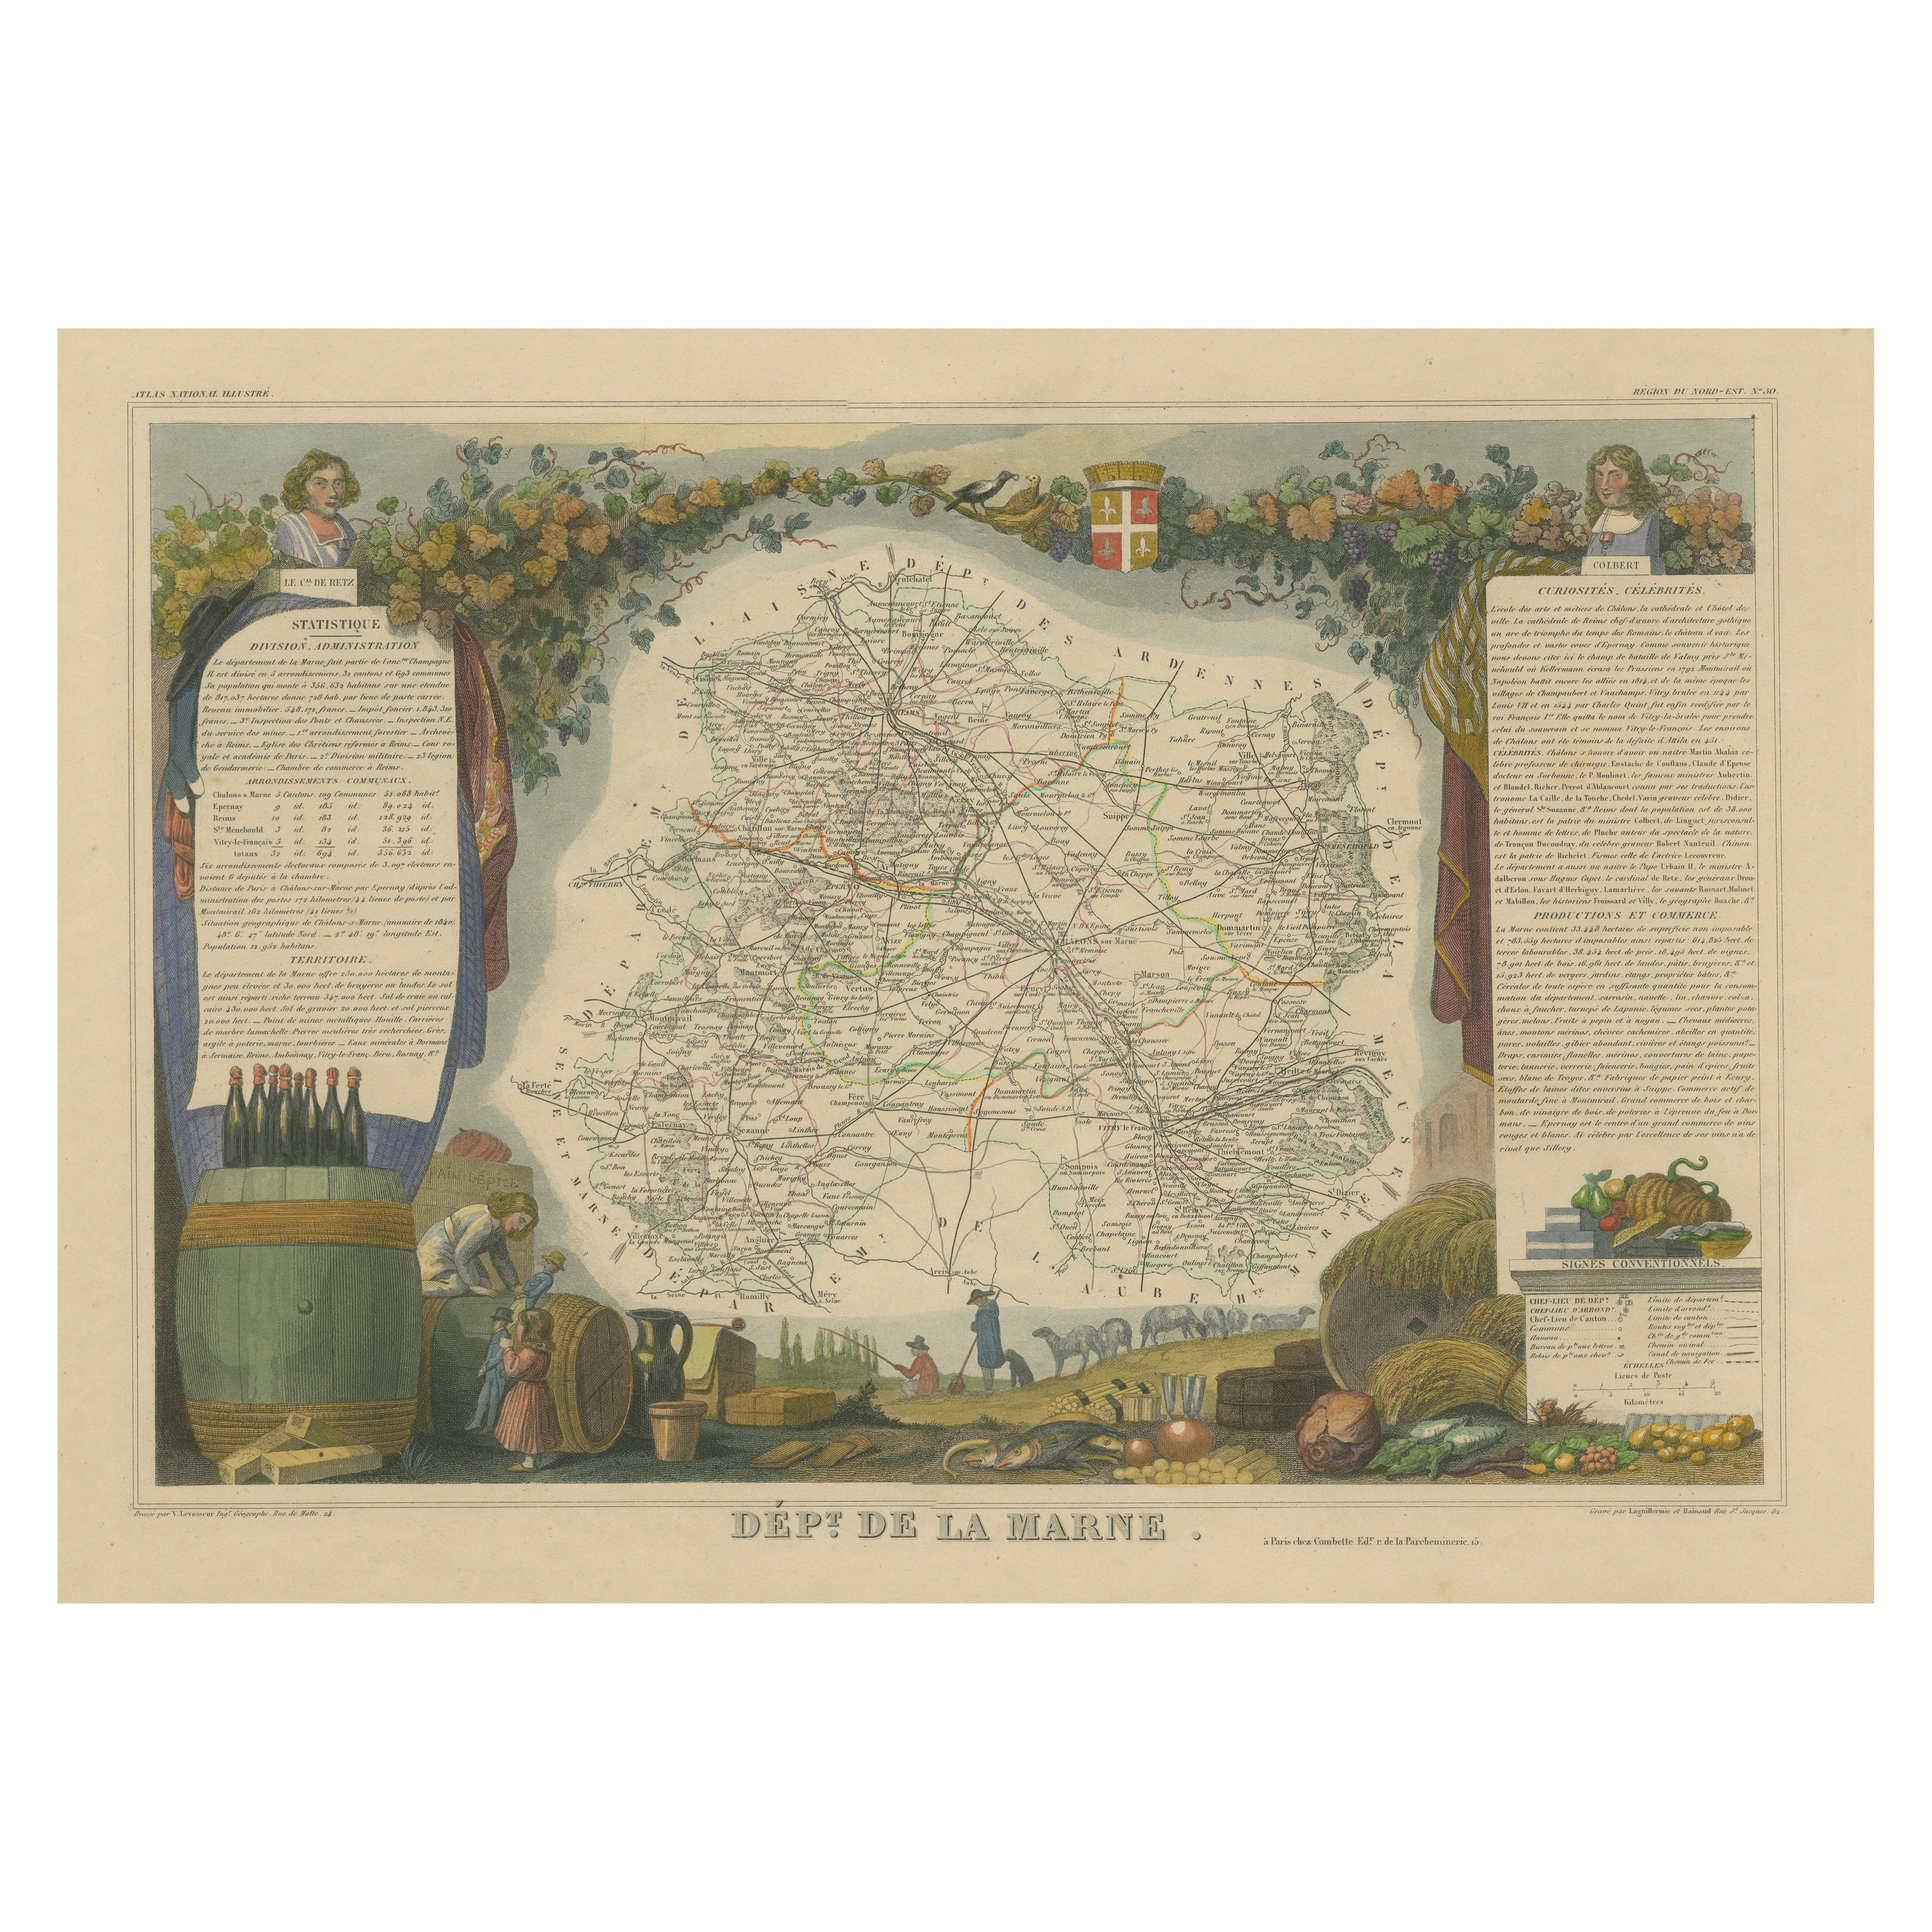 Hand Colored Antique Map of the Department of Marne, France